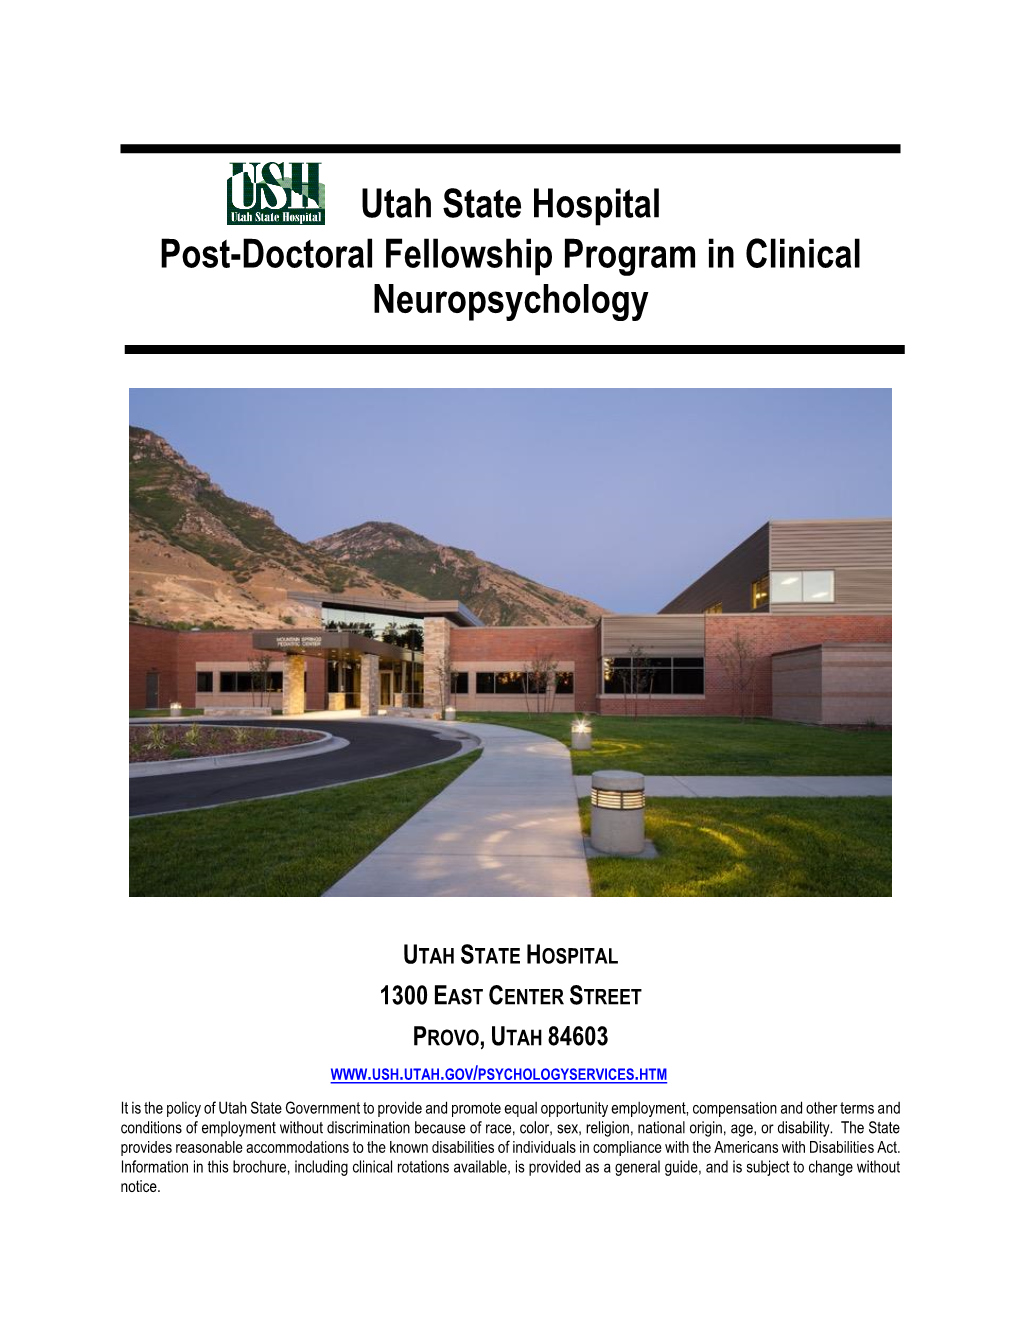 Utah State Hospital Post-Doctoral Fellowship Program in Clinical Neuropsychology